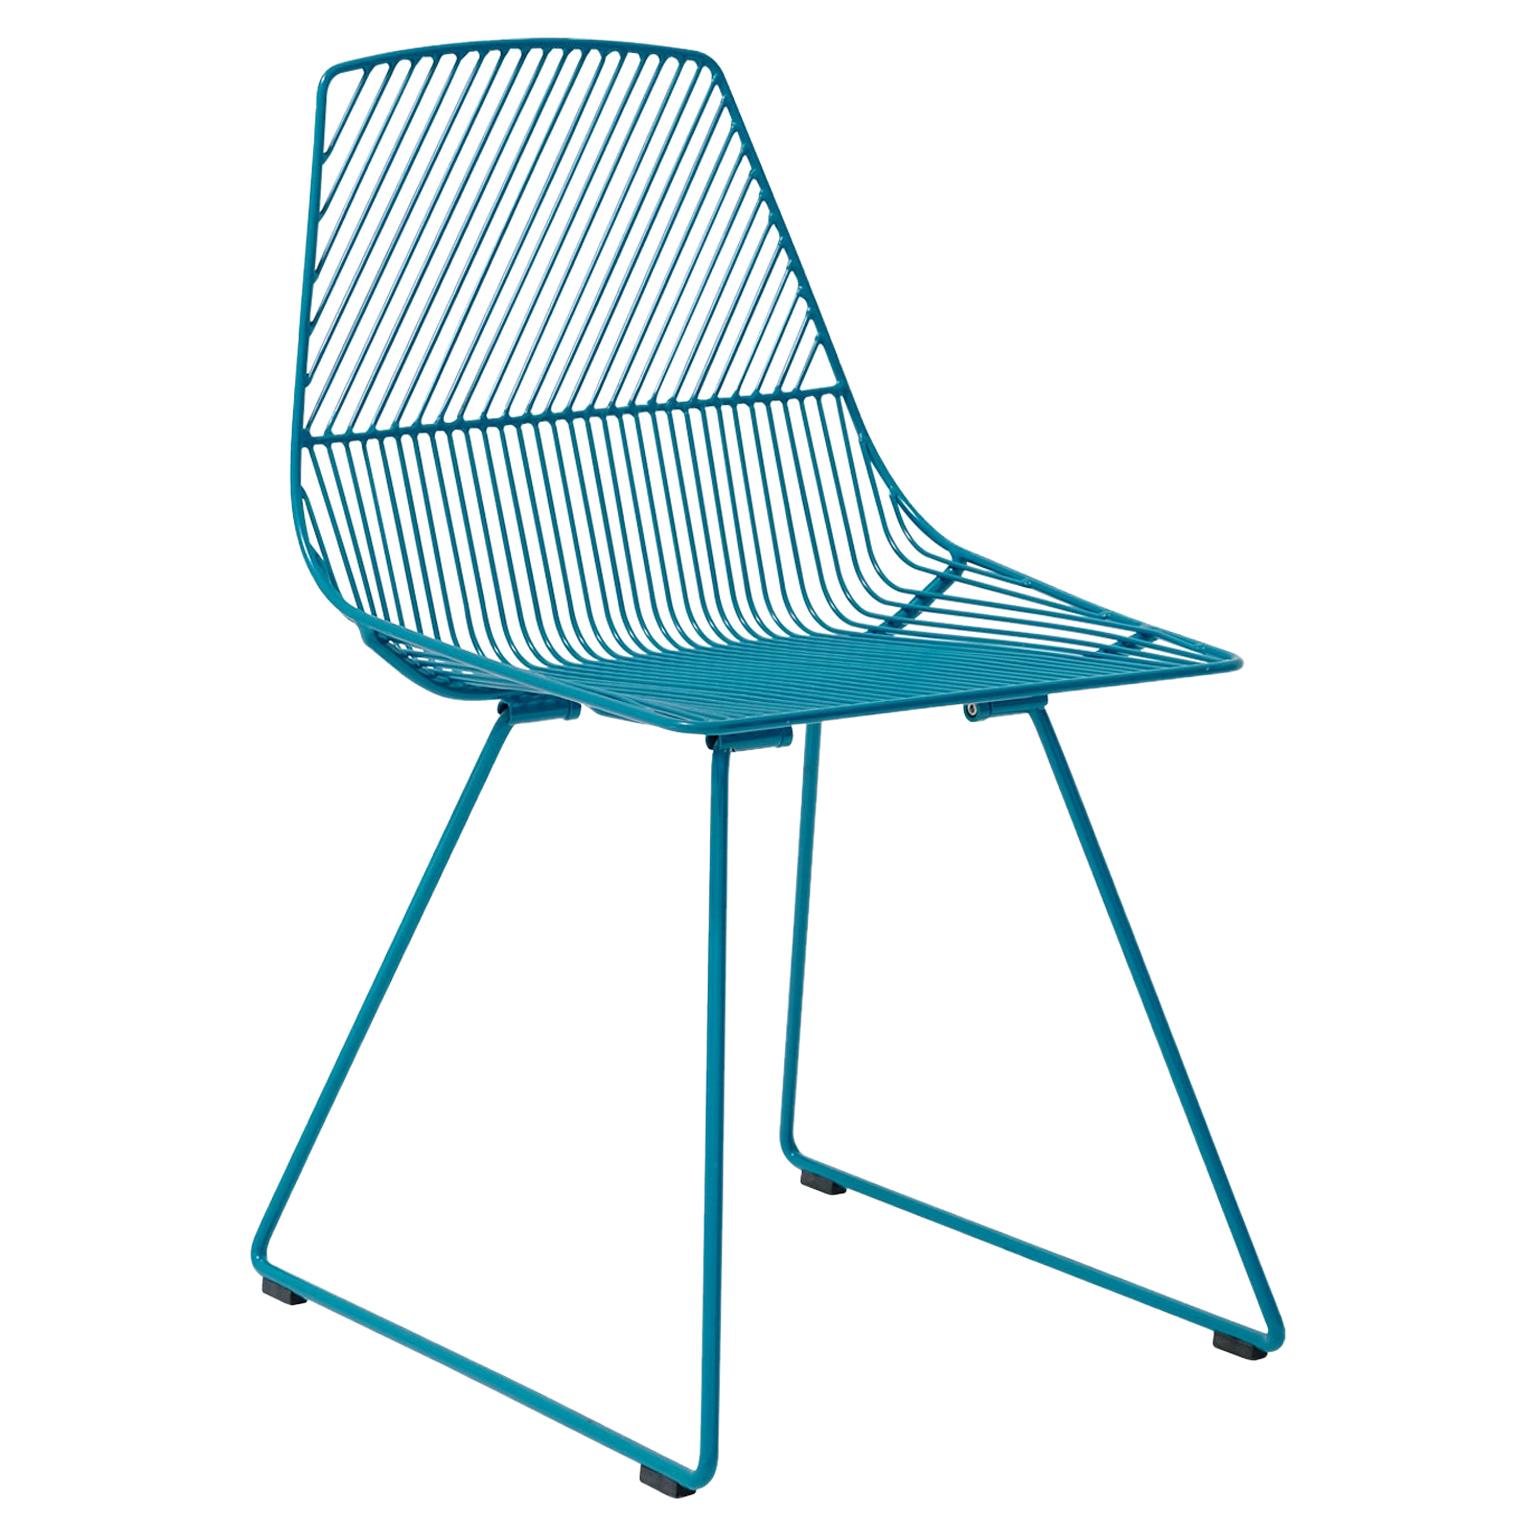 Modern Minimalist Side Chair, Ethel Chair in Peacock Blue by Bend Goods